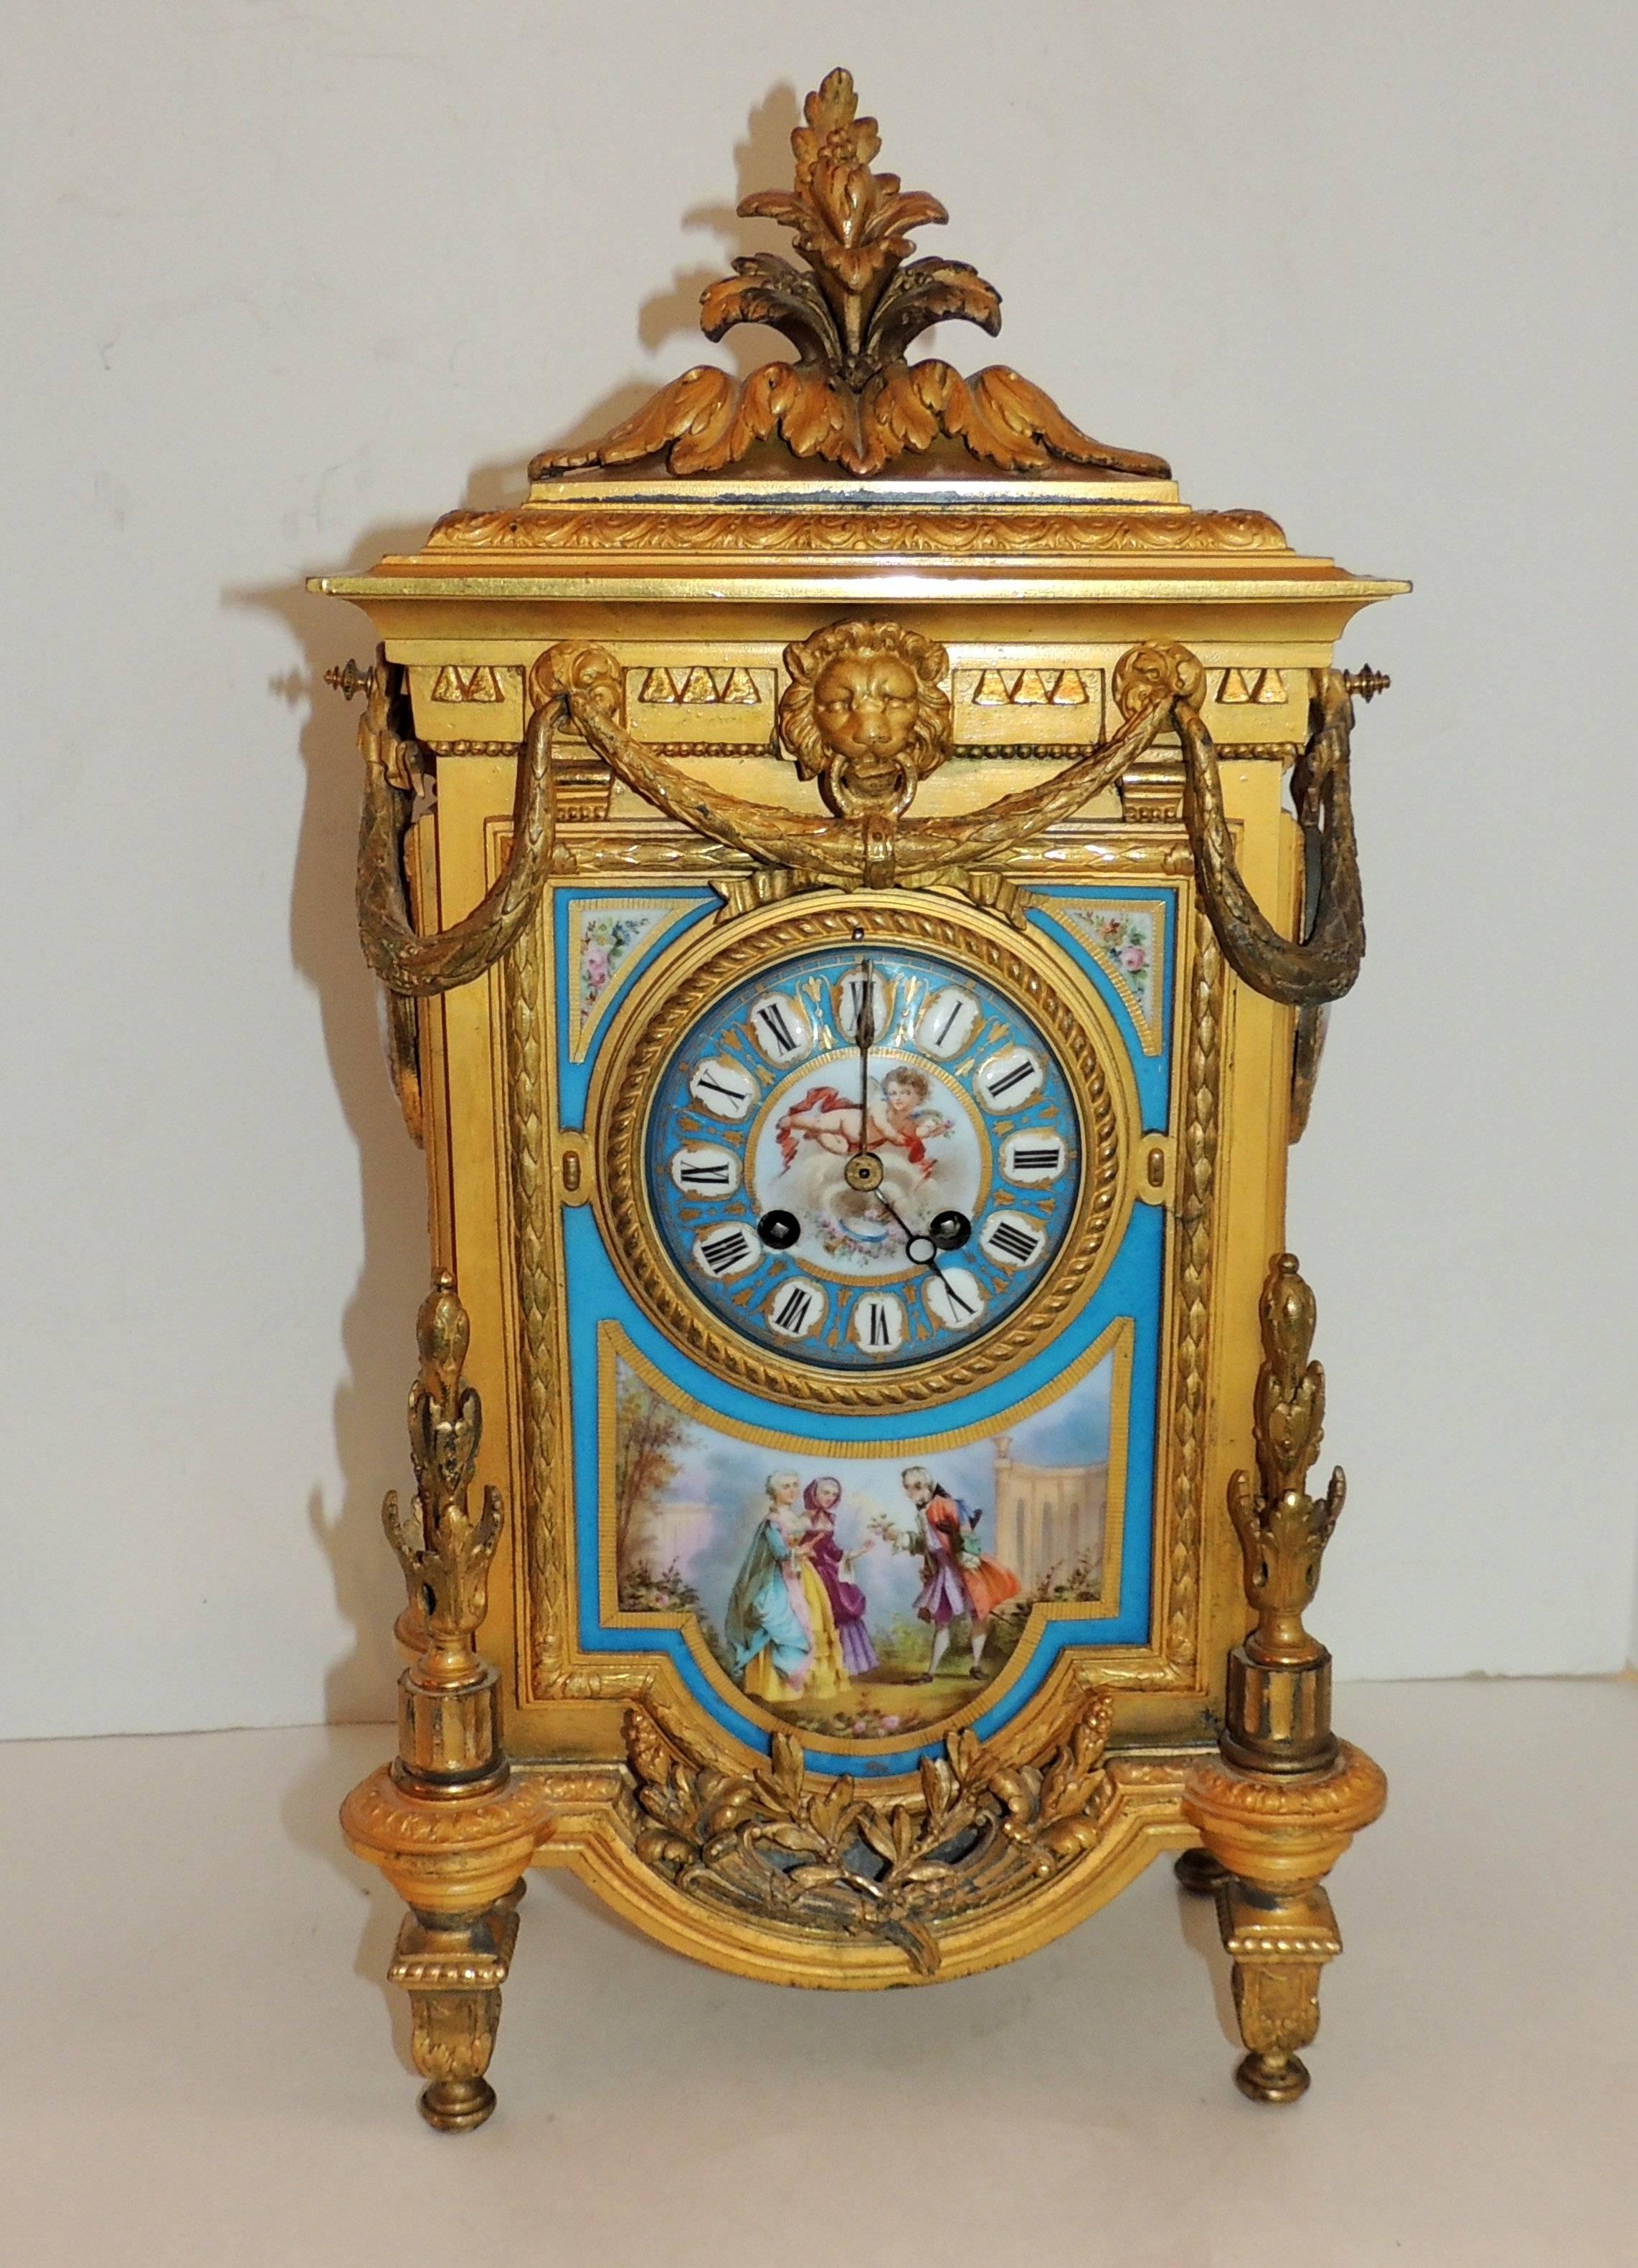 Large decorated enameled porcelain doré bronze clock, floral elements, lion mask with filigree, swags and cherub face.

Measures: 20" H x 14" W x 6" D.
 